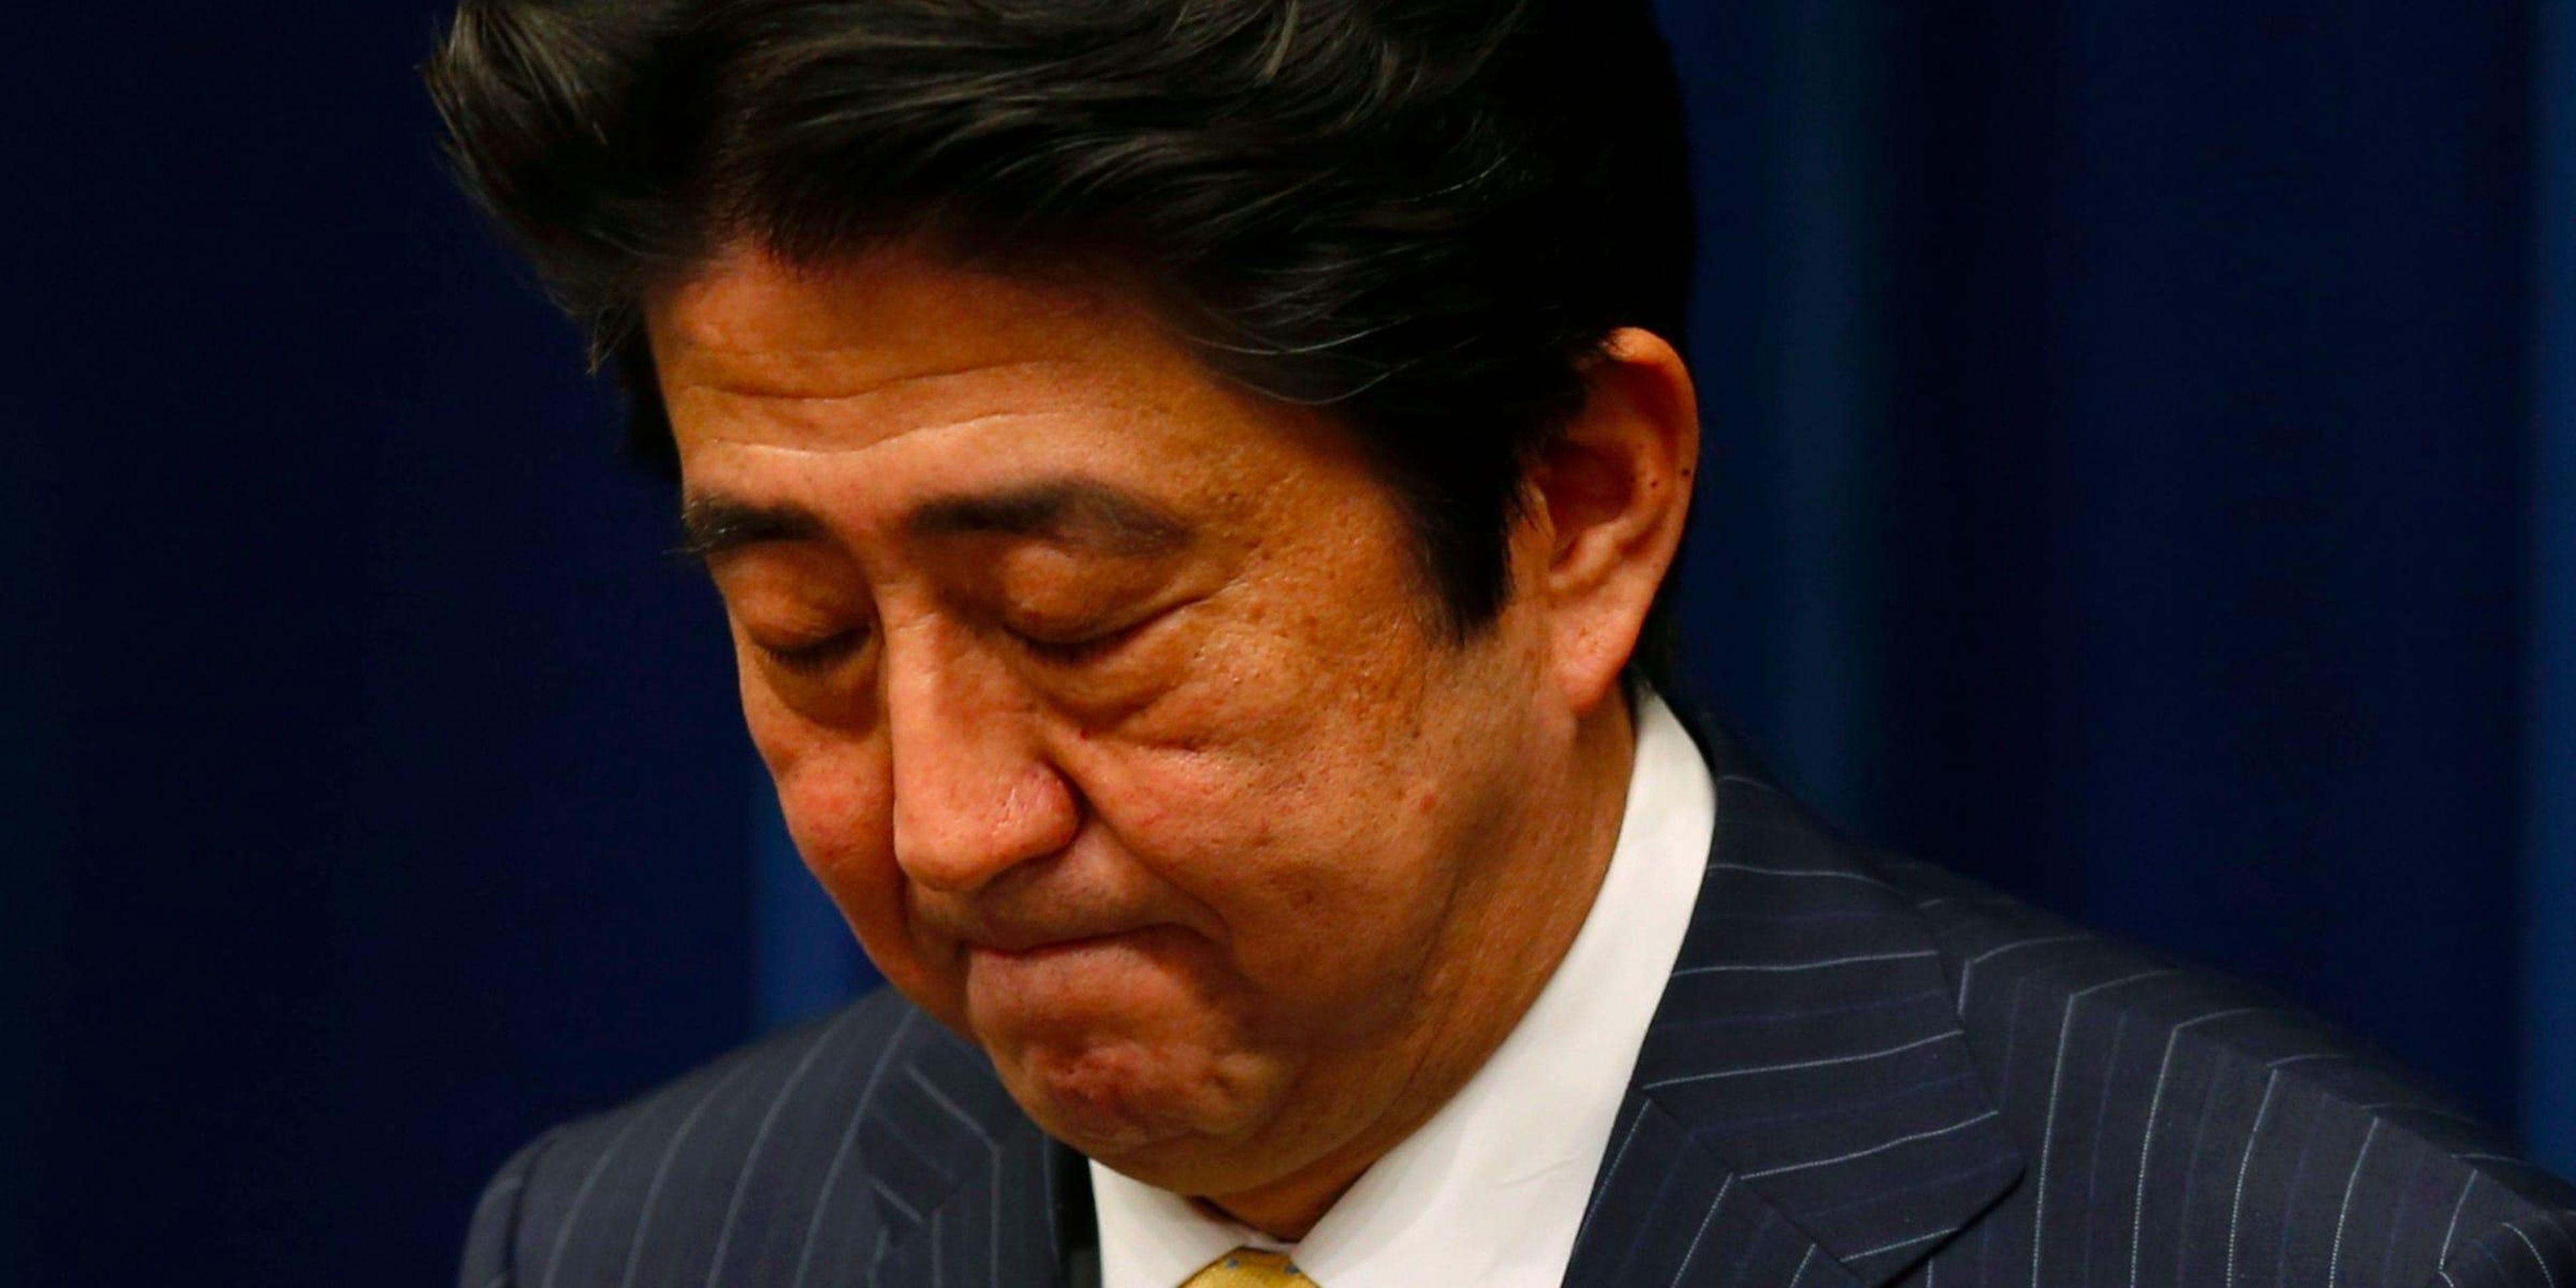 Japan's Prime Minister Shinzo Abe bows at the end of a news conference at his official residence in Tokyo June 26, 2013